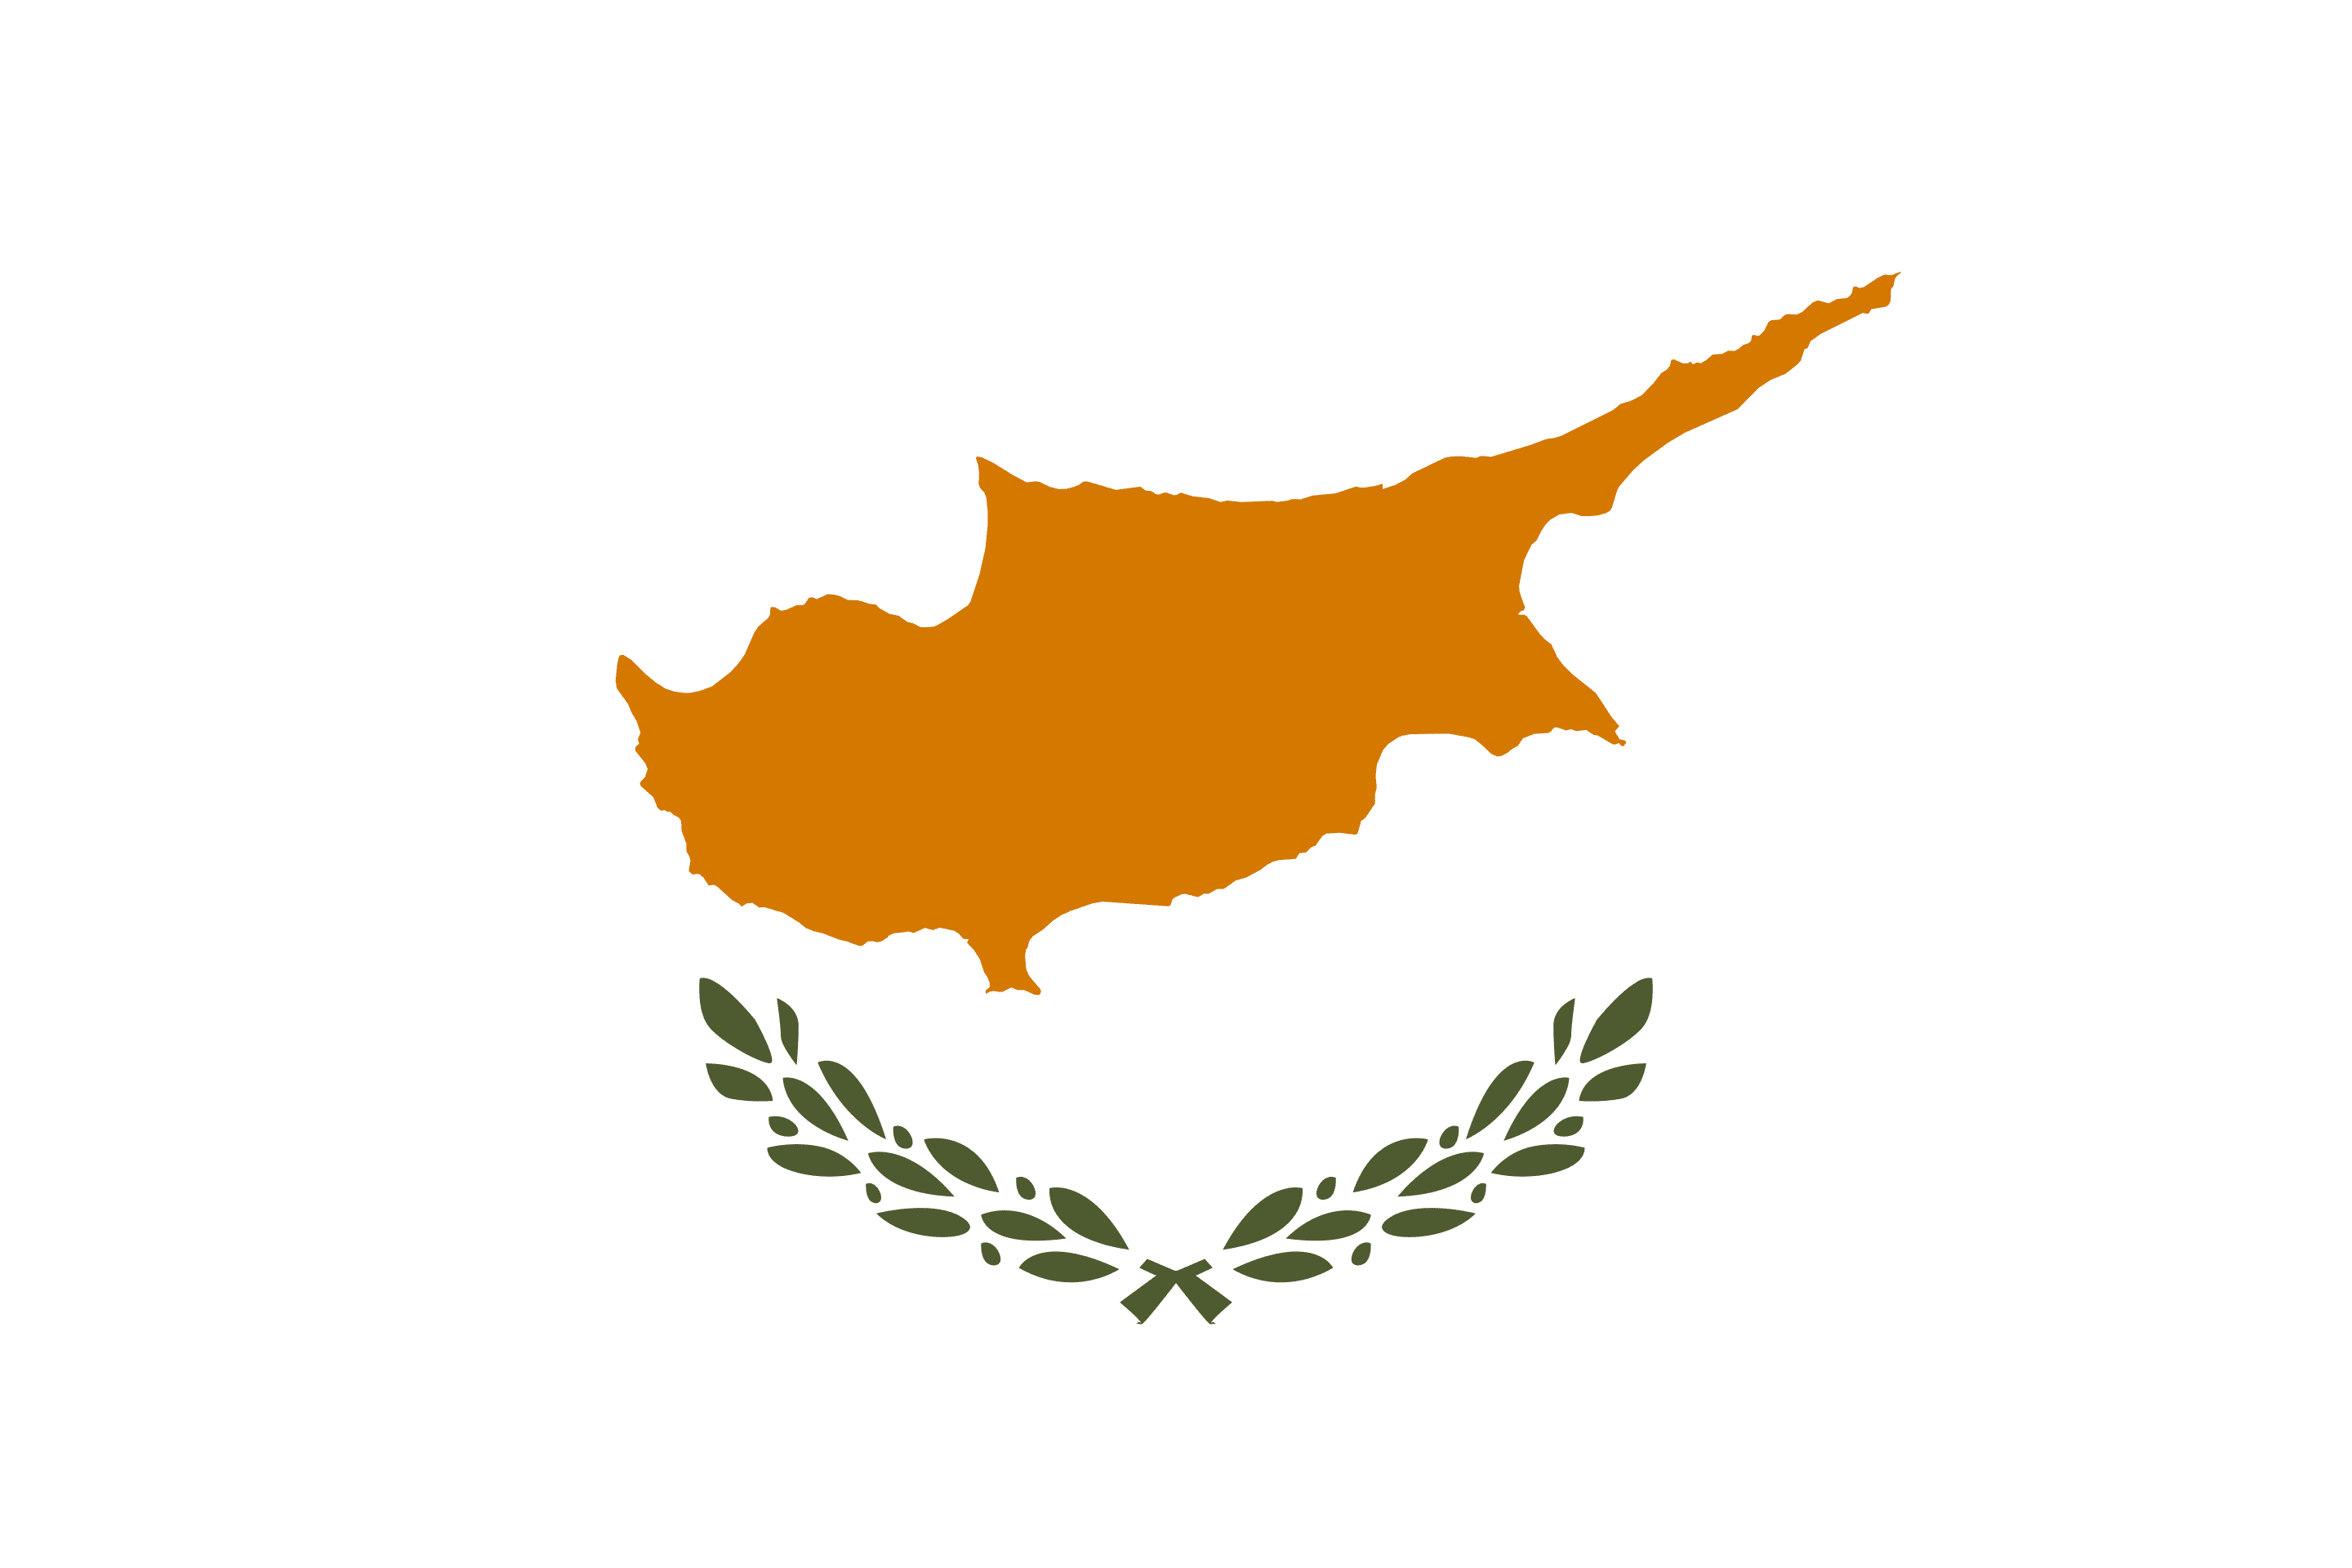 Facts of Cyprus